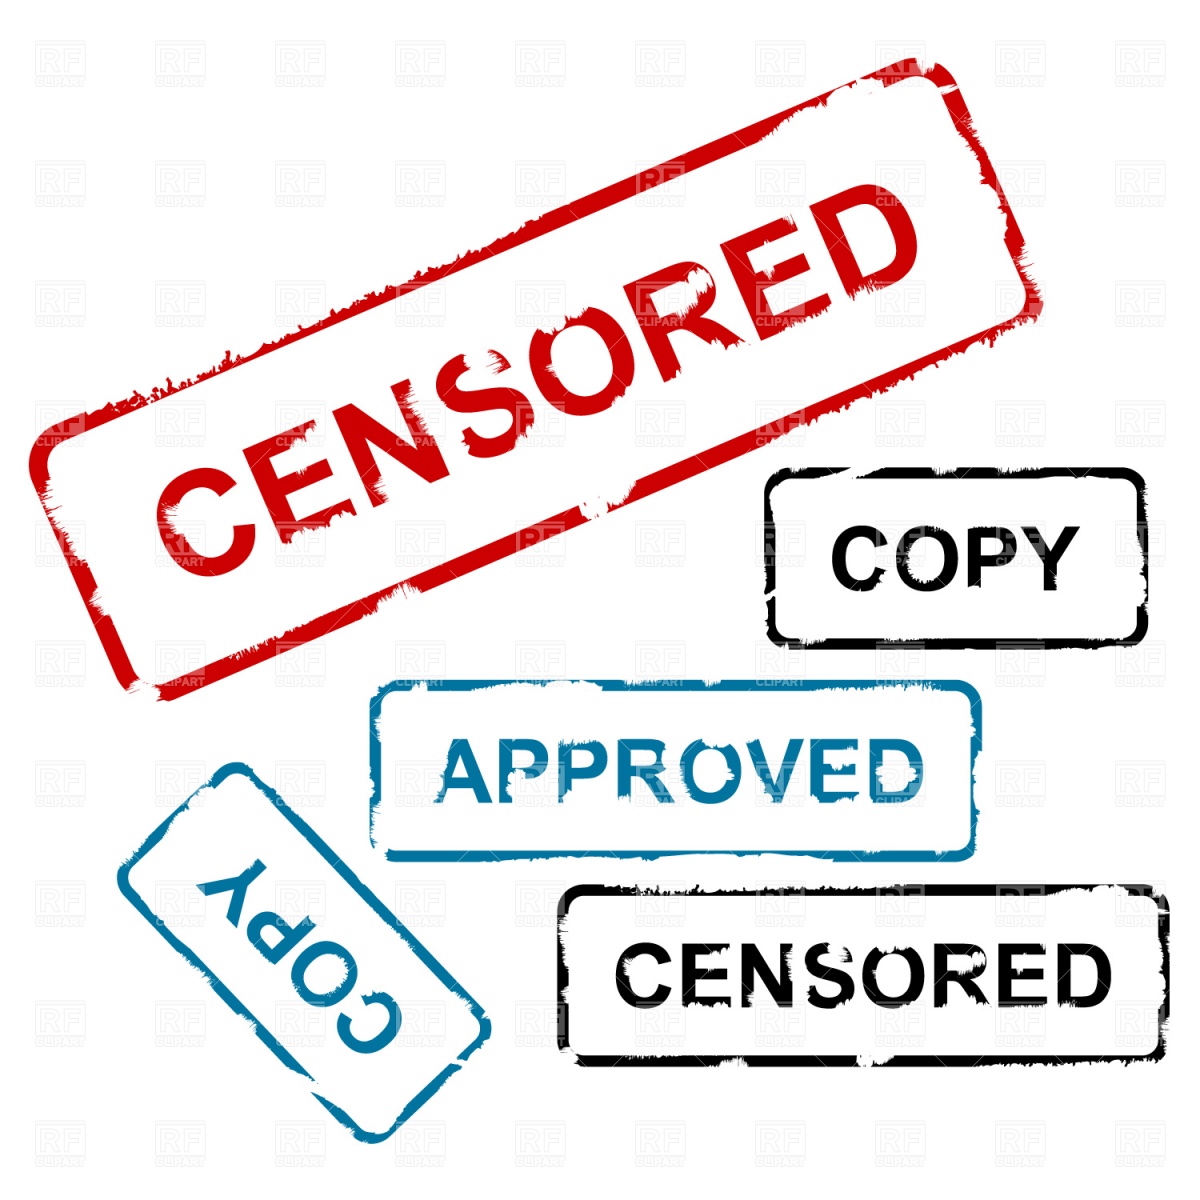 Censored And Approved Stamp 904 Download Royalty Free Vector Clipart